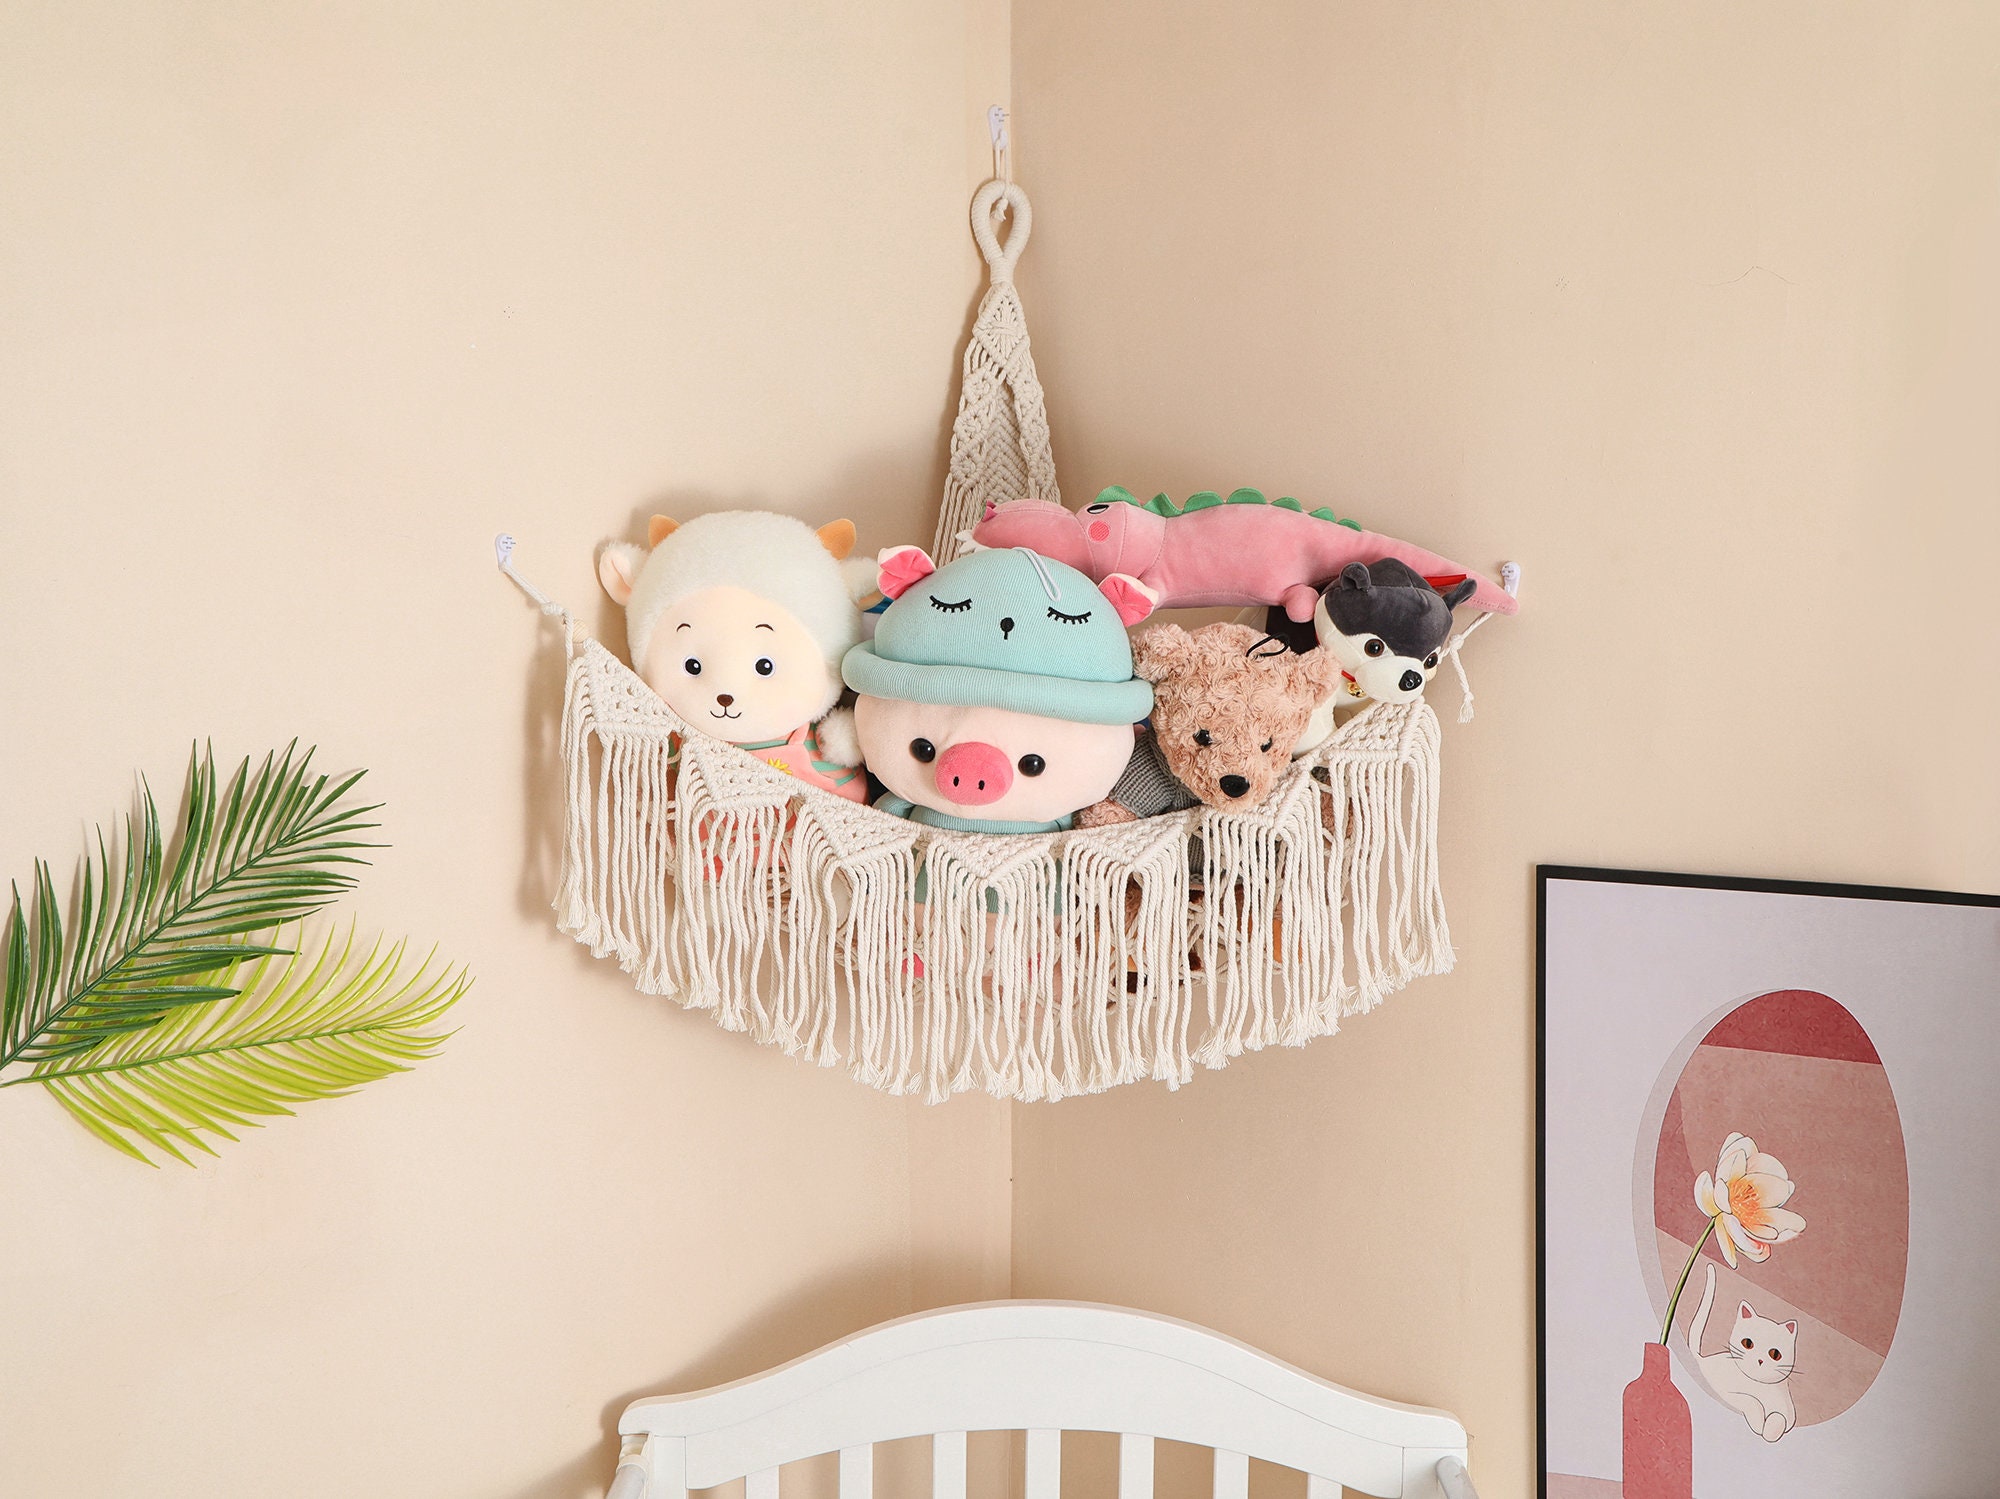 Extra large Stuffed Animal Storage for Corner Organizer,Premium PVC  Material with Elastic Band Hold Up to 150 Plush Toys,Stuffed Zoo Animal  Holder and